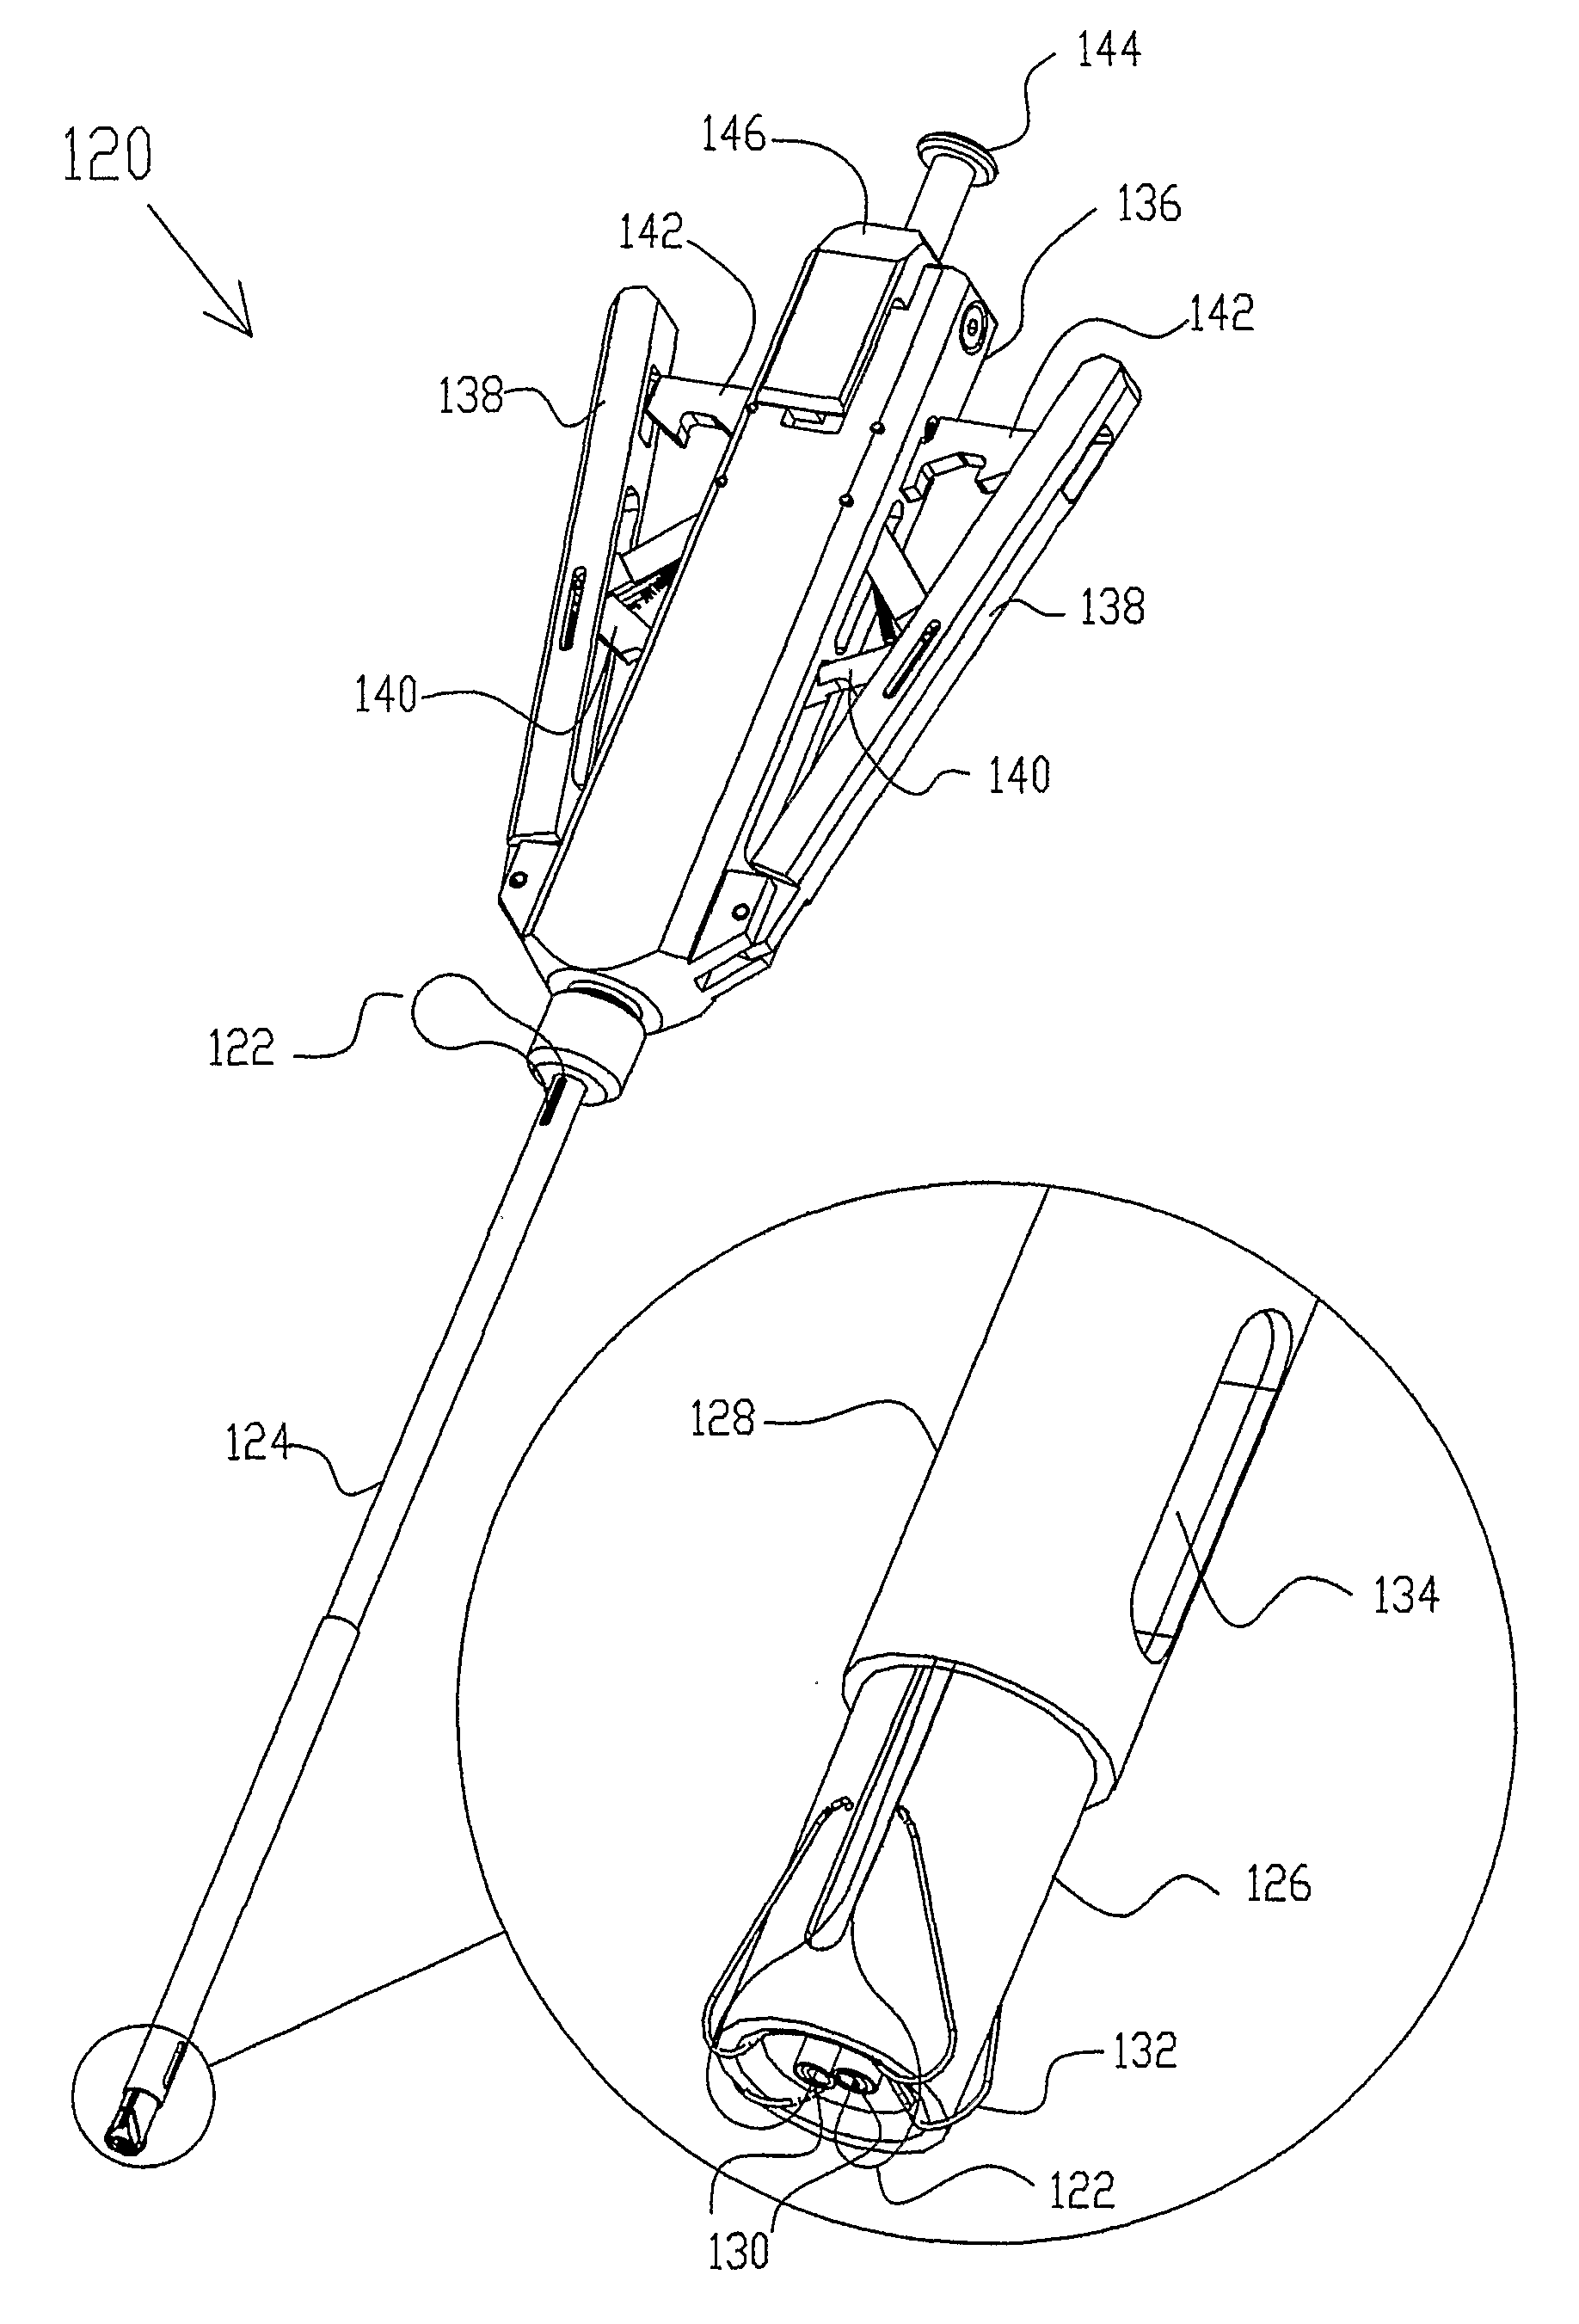 Suture device with first and second needle giudes attached to a shaft and respectively holding first and second needles